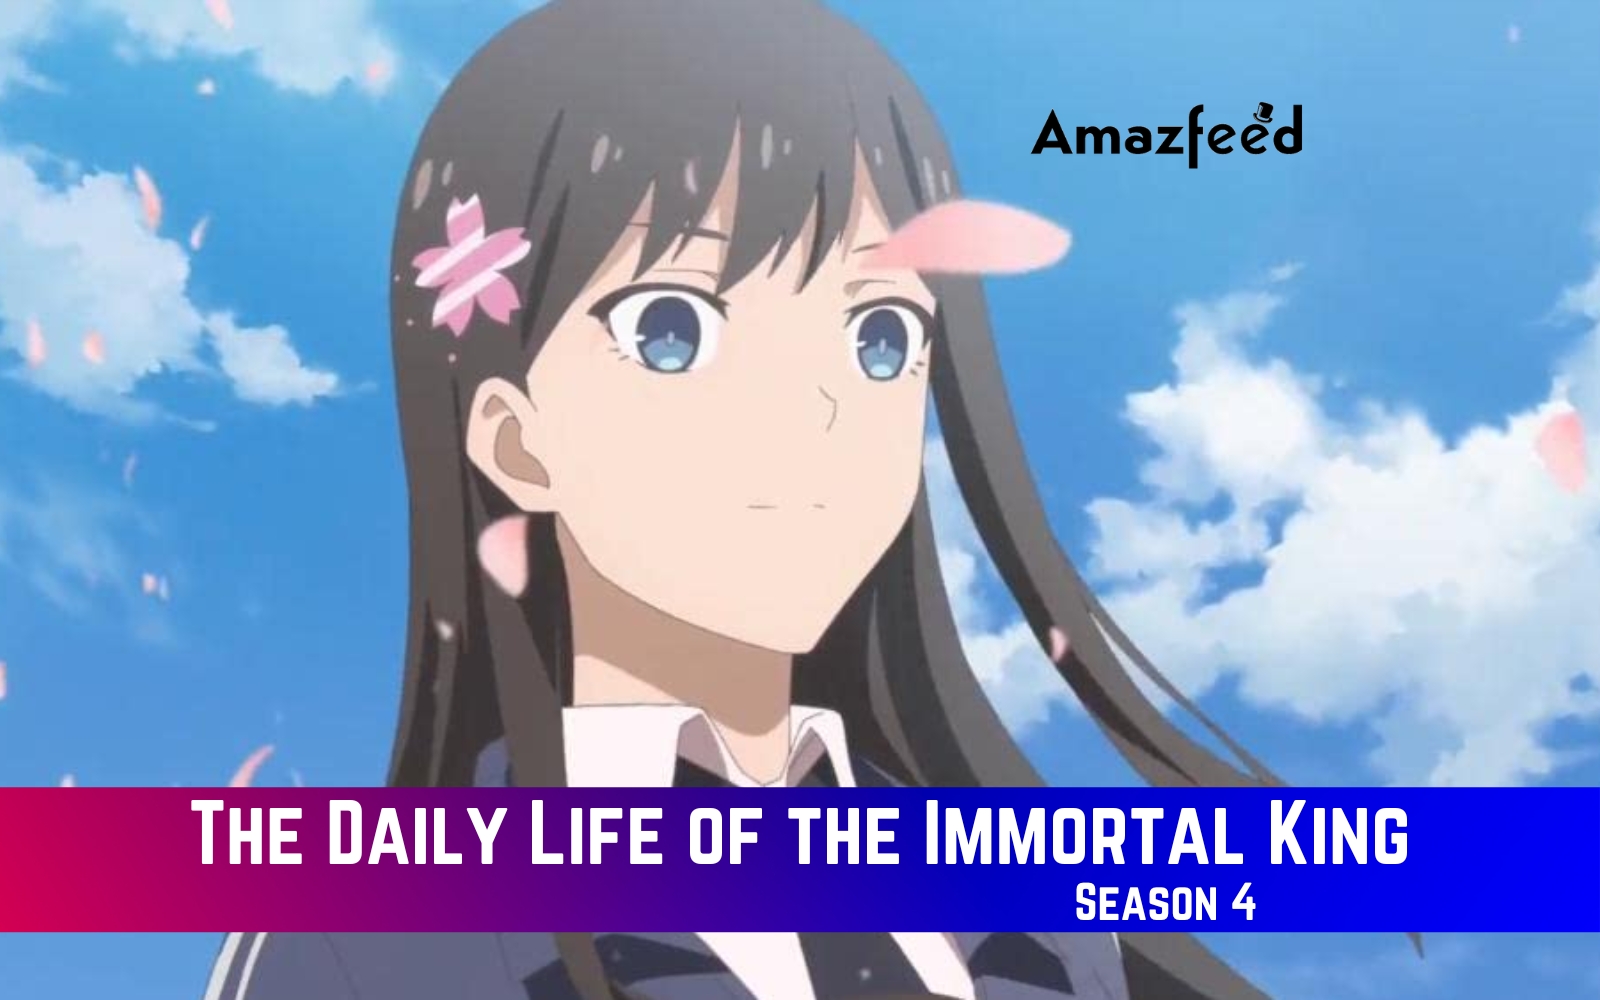 THE RELEASE DATE FOR THE 4TH SEASON OF THE DAILY LIFE OF THE IMMORTAL KING  IS OUT 